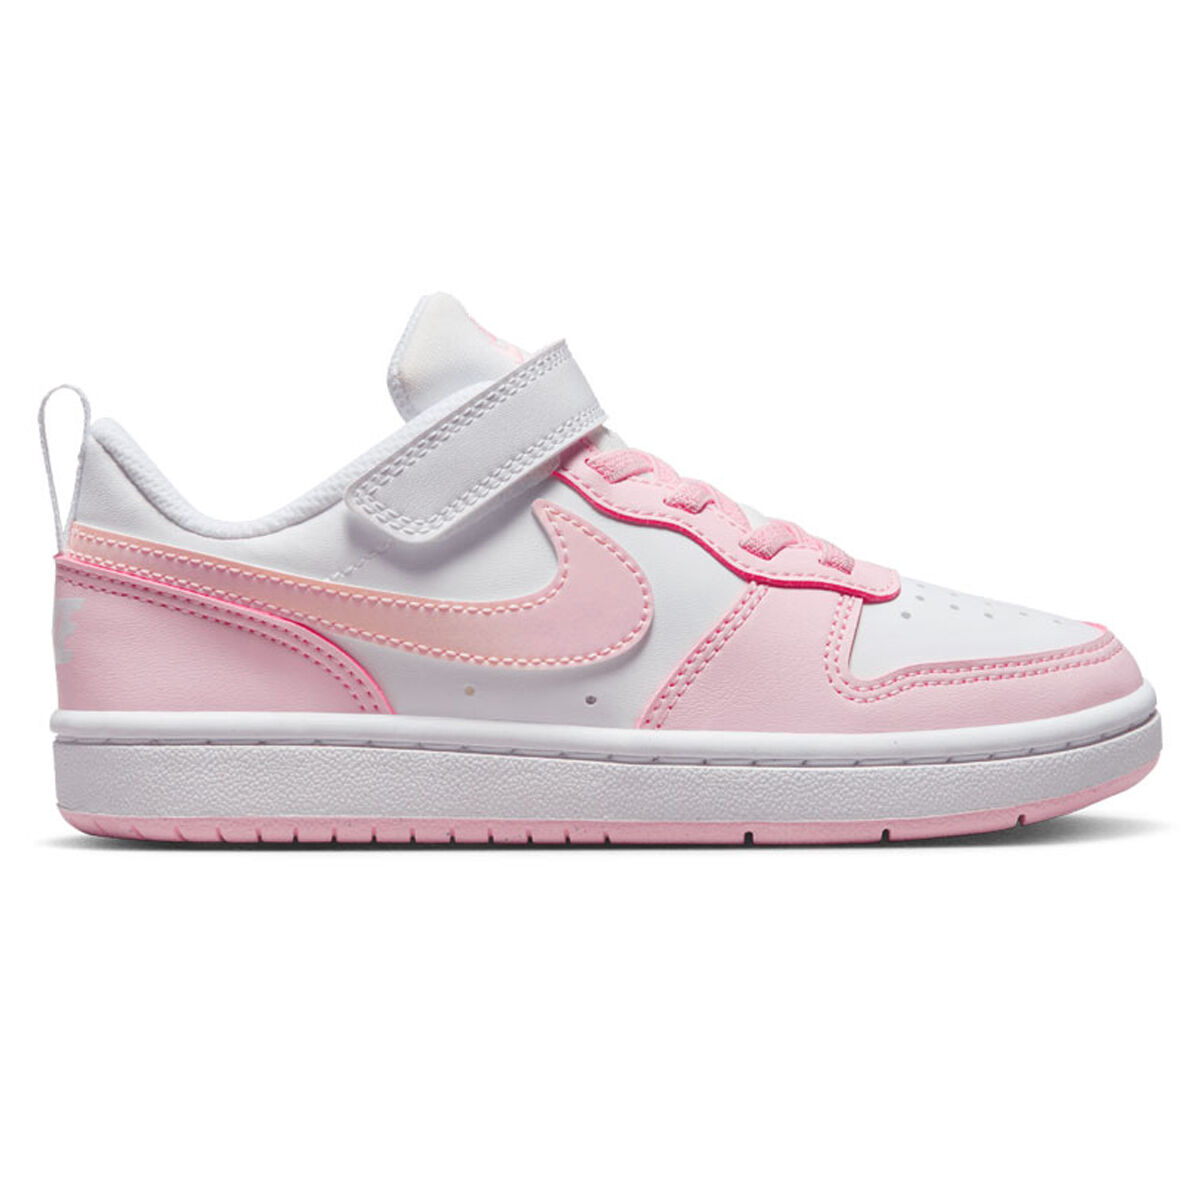 Nike Court Borough Low Recraft PS Kids Casual Shoes White/Pink US